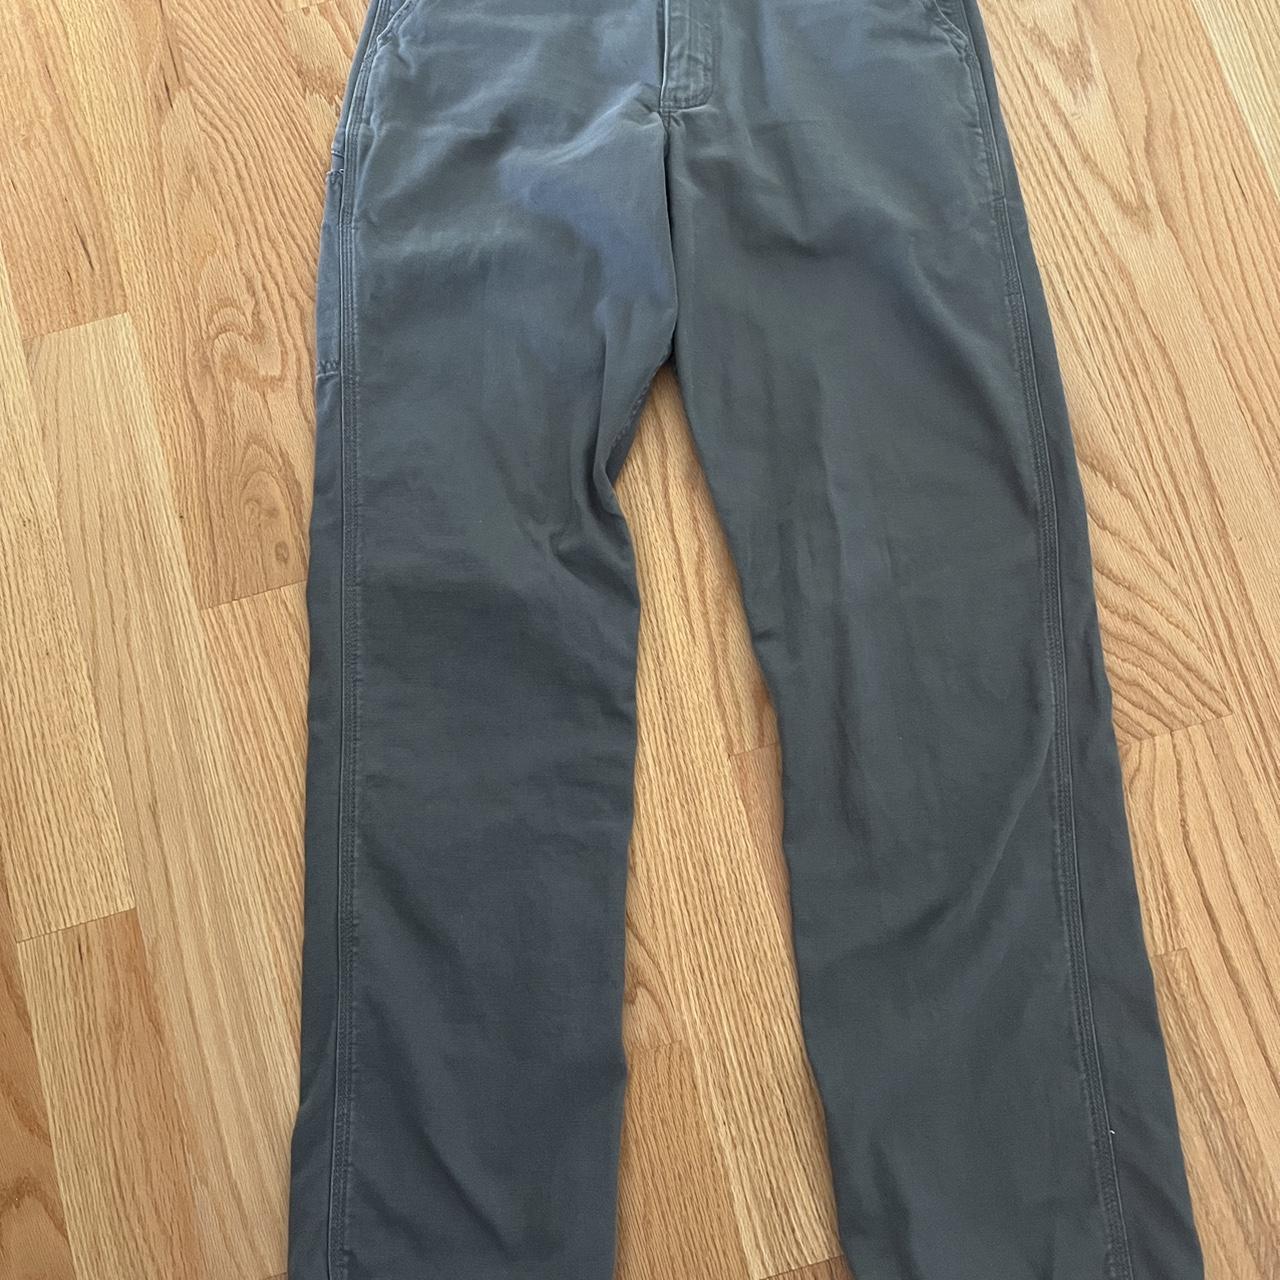 Specific sizing shown in picture, grey normal... - Depop